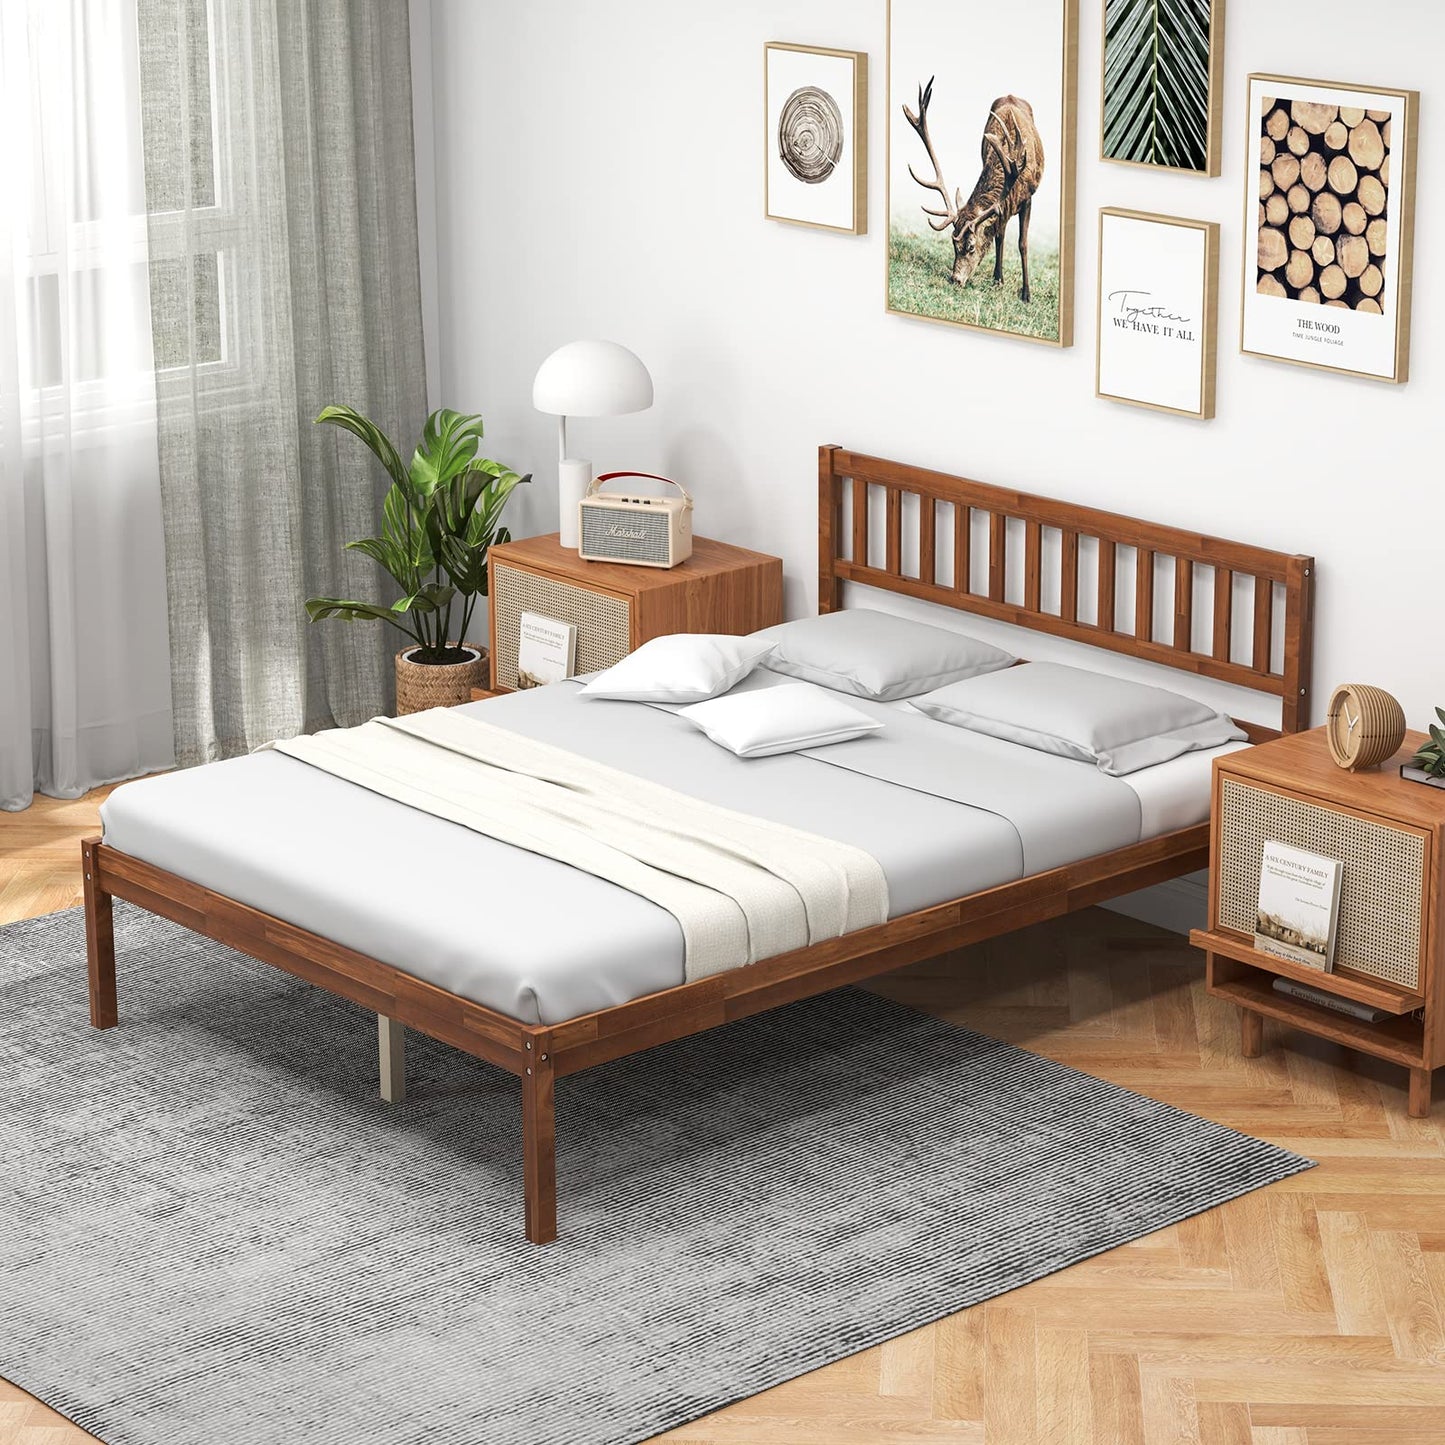 Giantex Wood Full Bed Frame with Headboard, Mid Century Platform Bed with Wood Slat Support, Solid Wood Foundation, 12 Inch Height for Under Bed